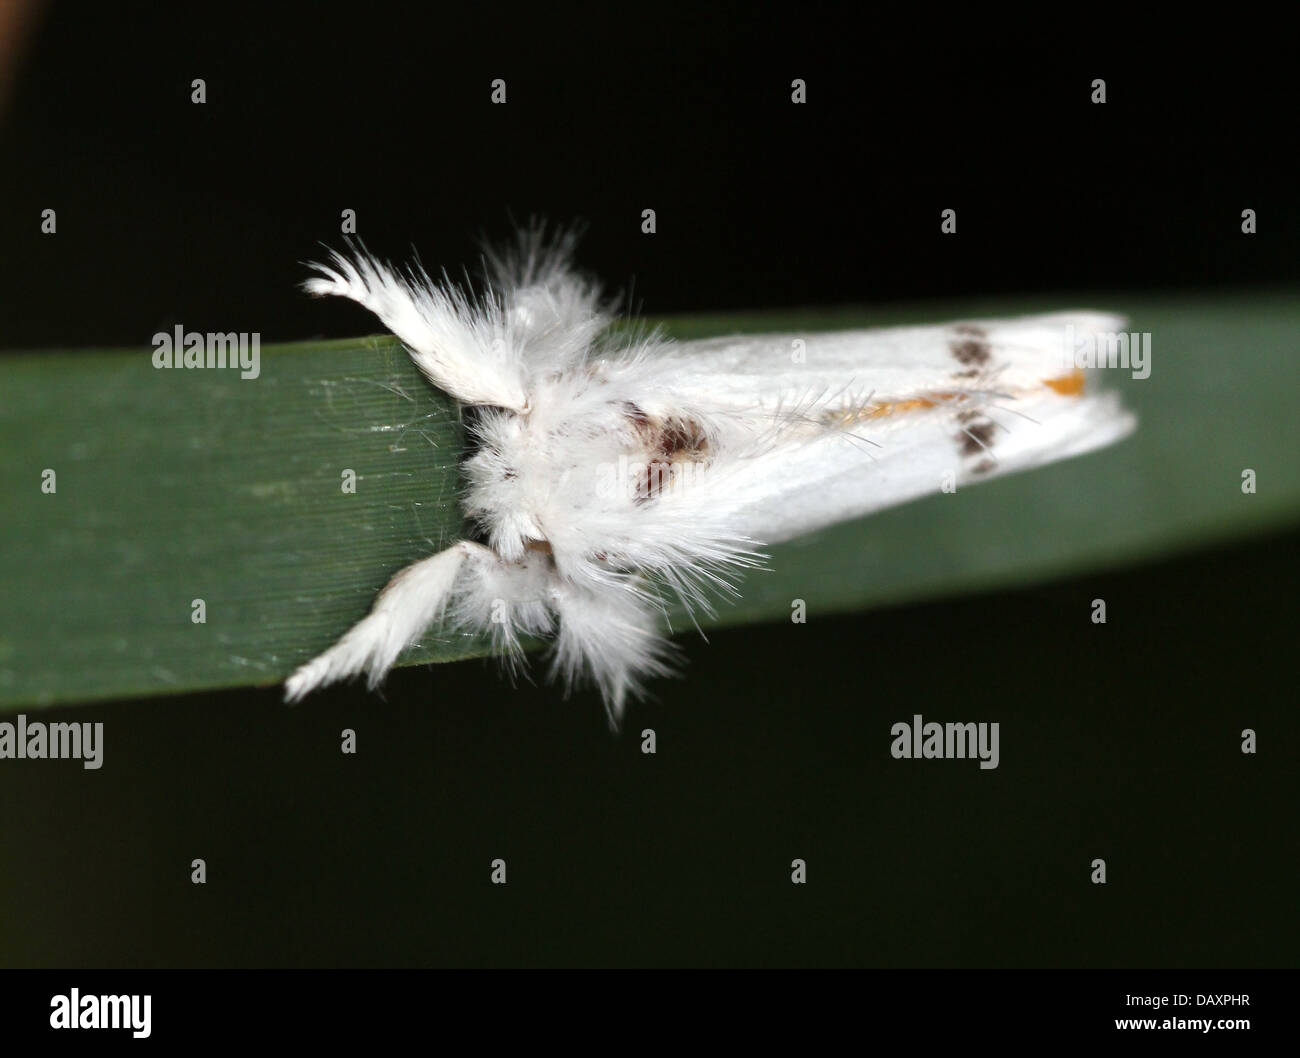 Male Yellow-tail Moth (Euproctis similis, a.k.a. Goldtail Moth or  Swan Moth) posing on a blade of grass Stock Photo